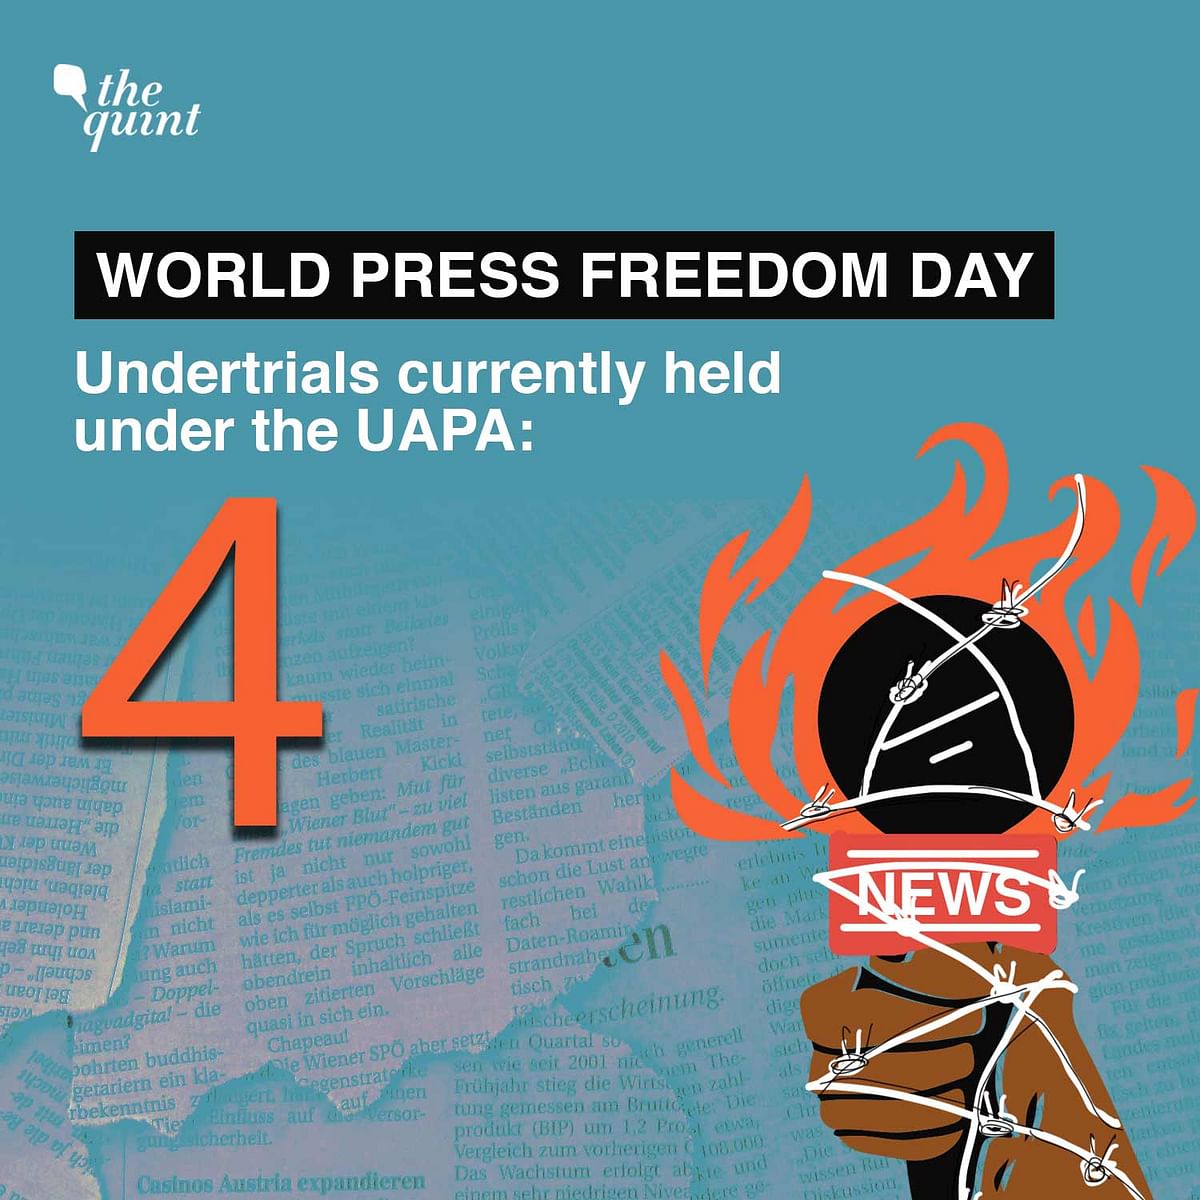 Seven journalists continue to languish in prisons across India as undertrials, as per CPJ.